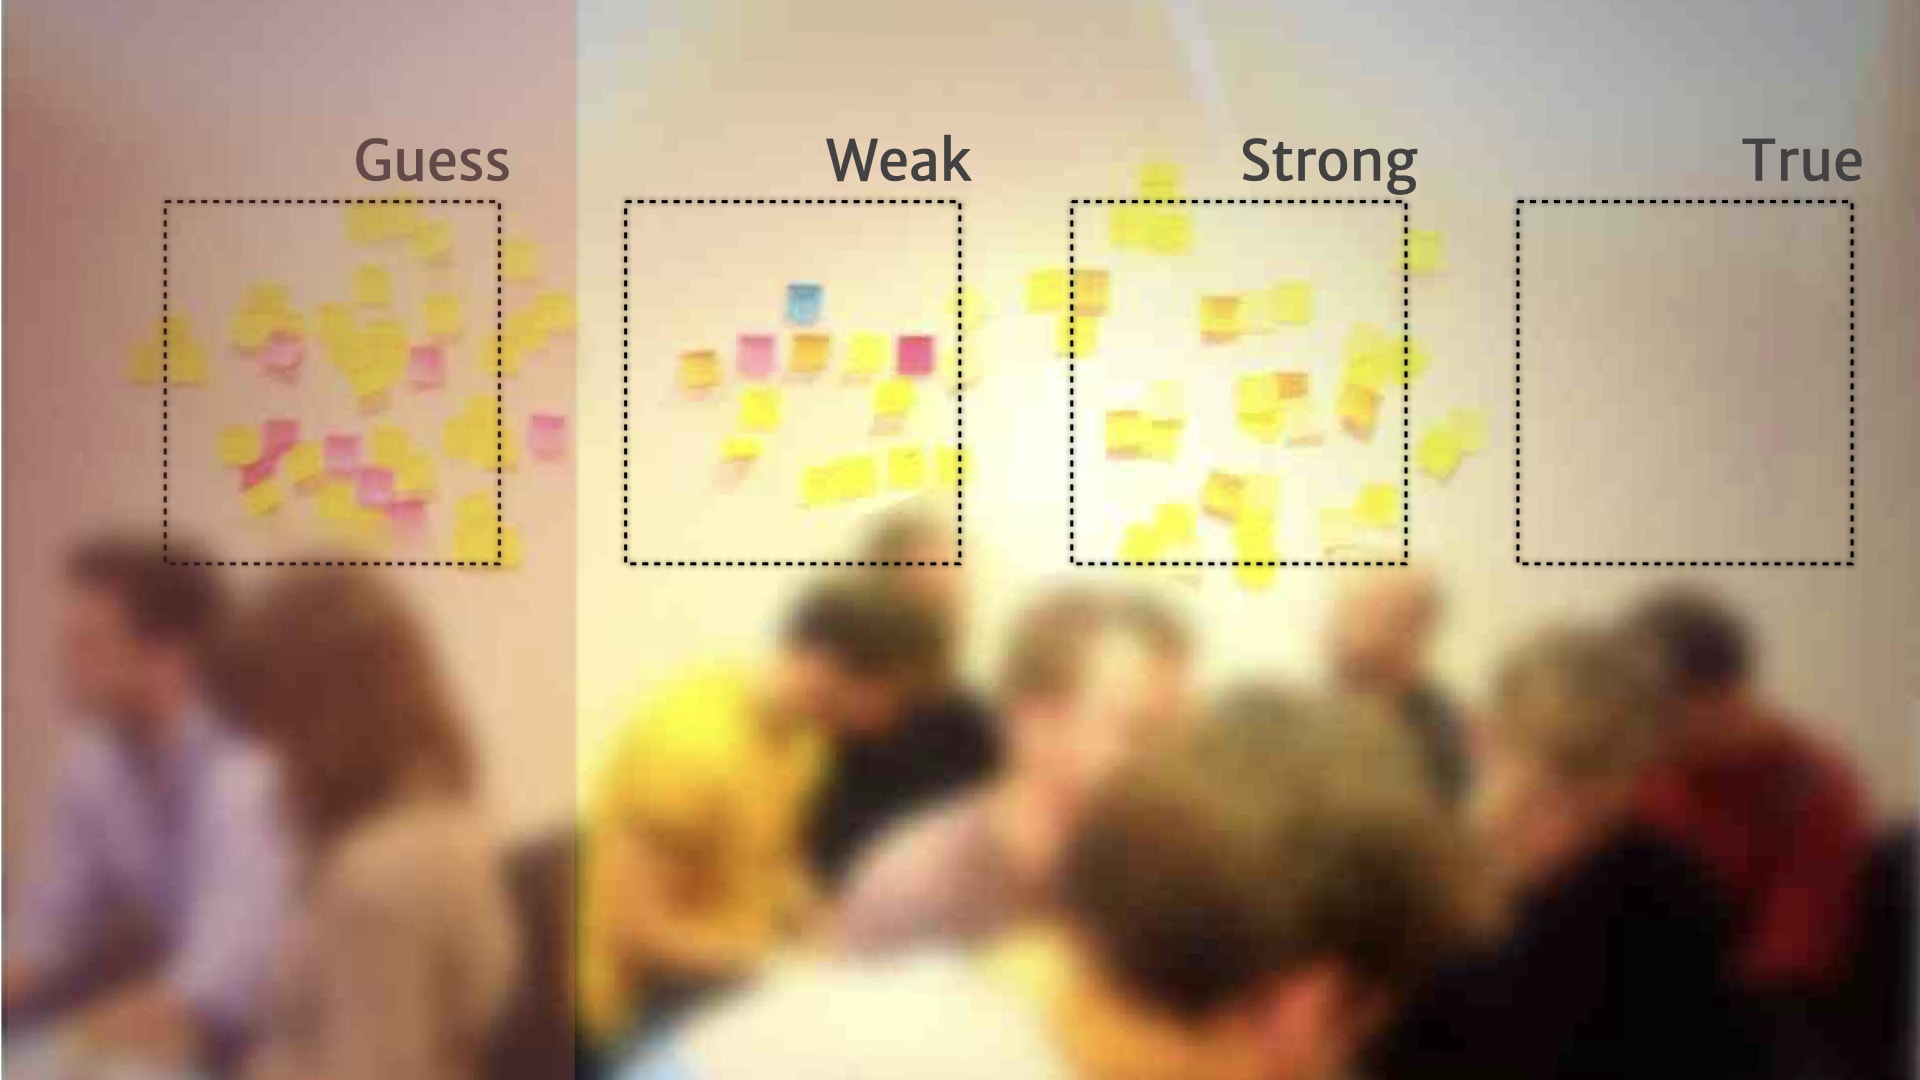 A picture of a wall of post-it notes divided into four categories running left to right (Guess, Weak, Strong, and True). The Guess category is highlighted in red.